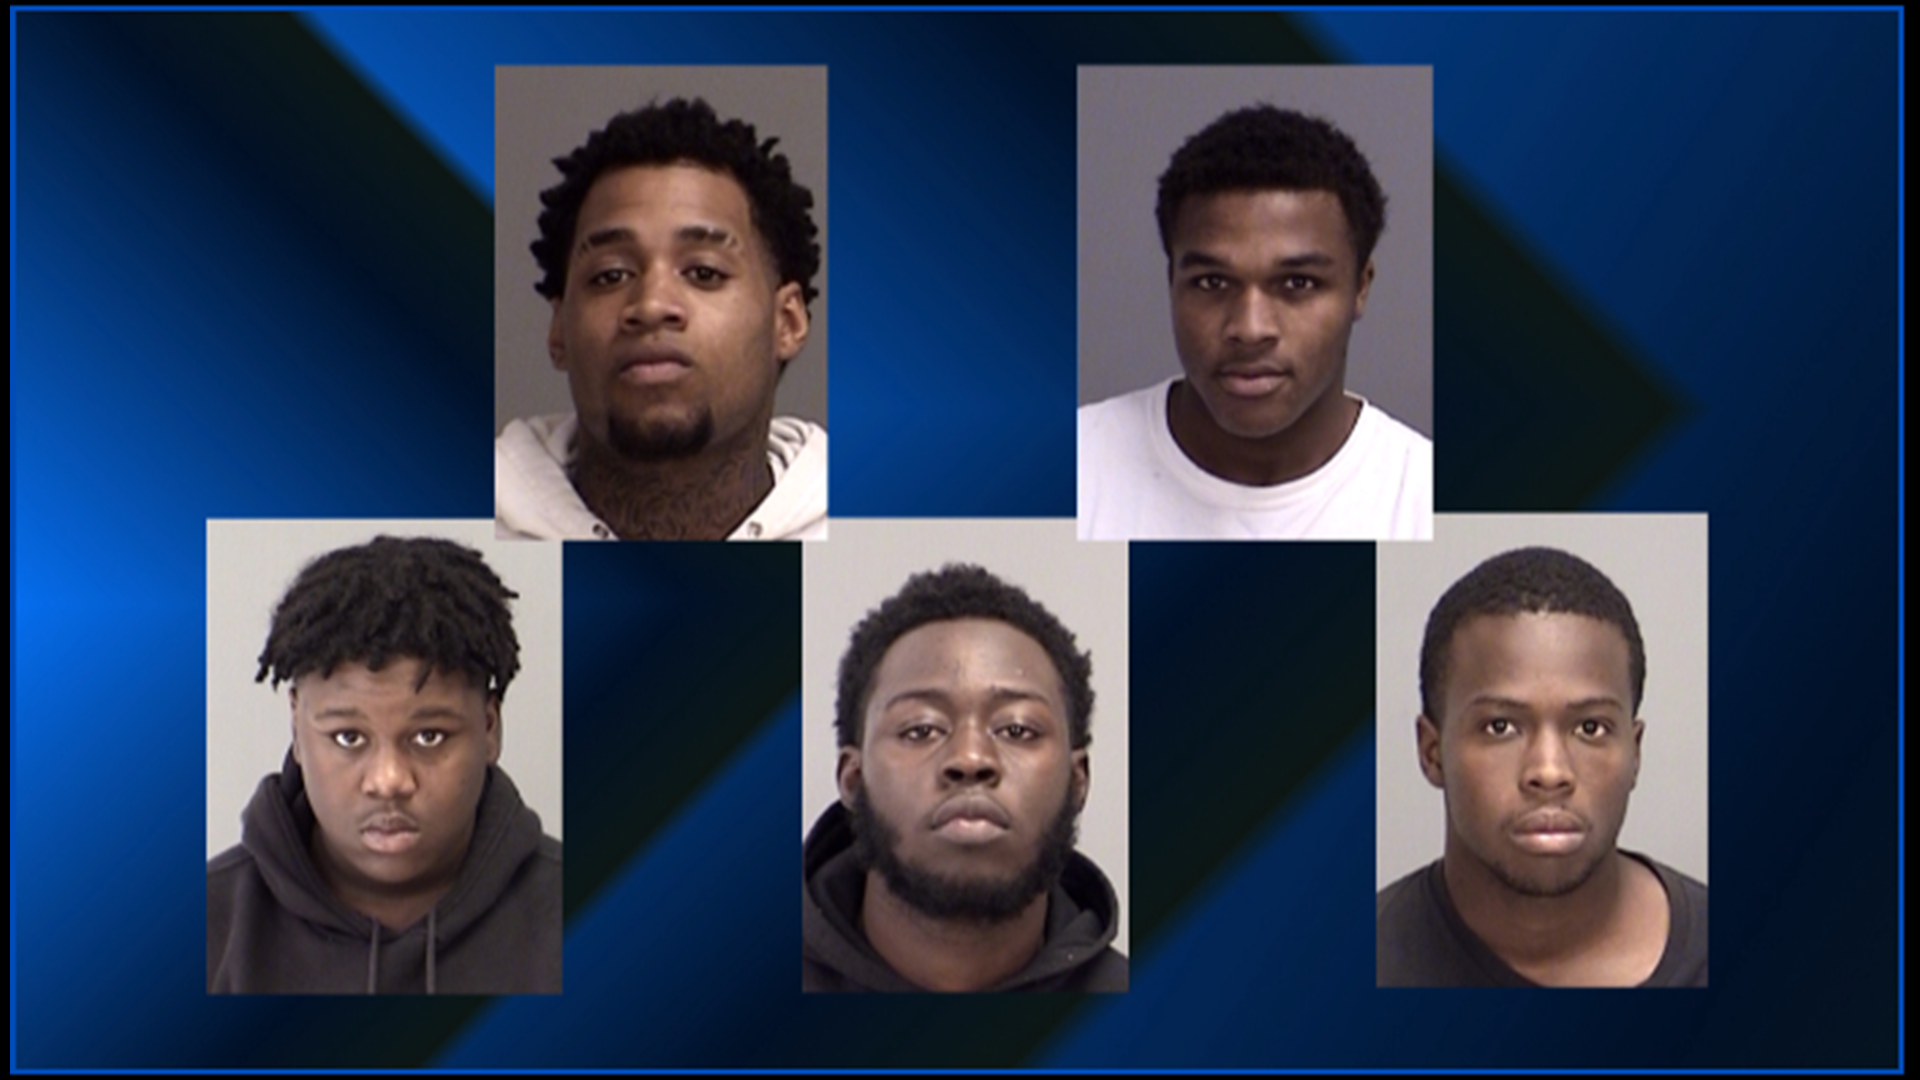 The five men are charged with engaging in organized crime in relation to multiple gun thefts in the area.